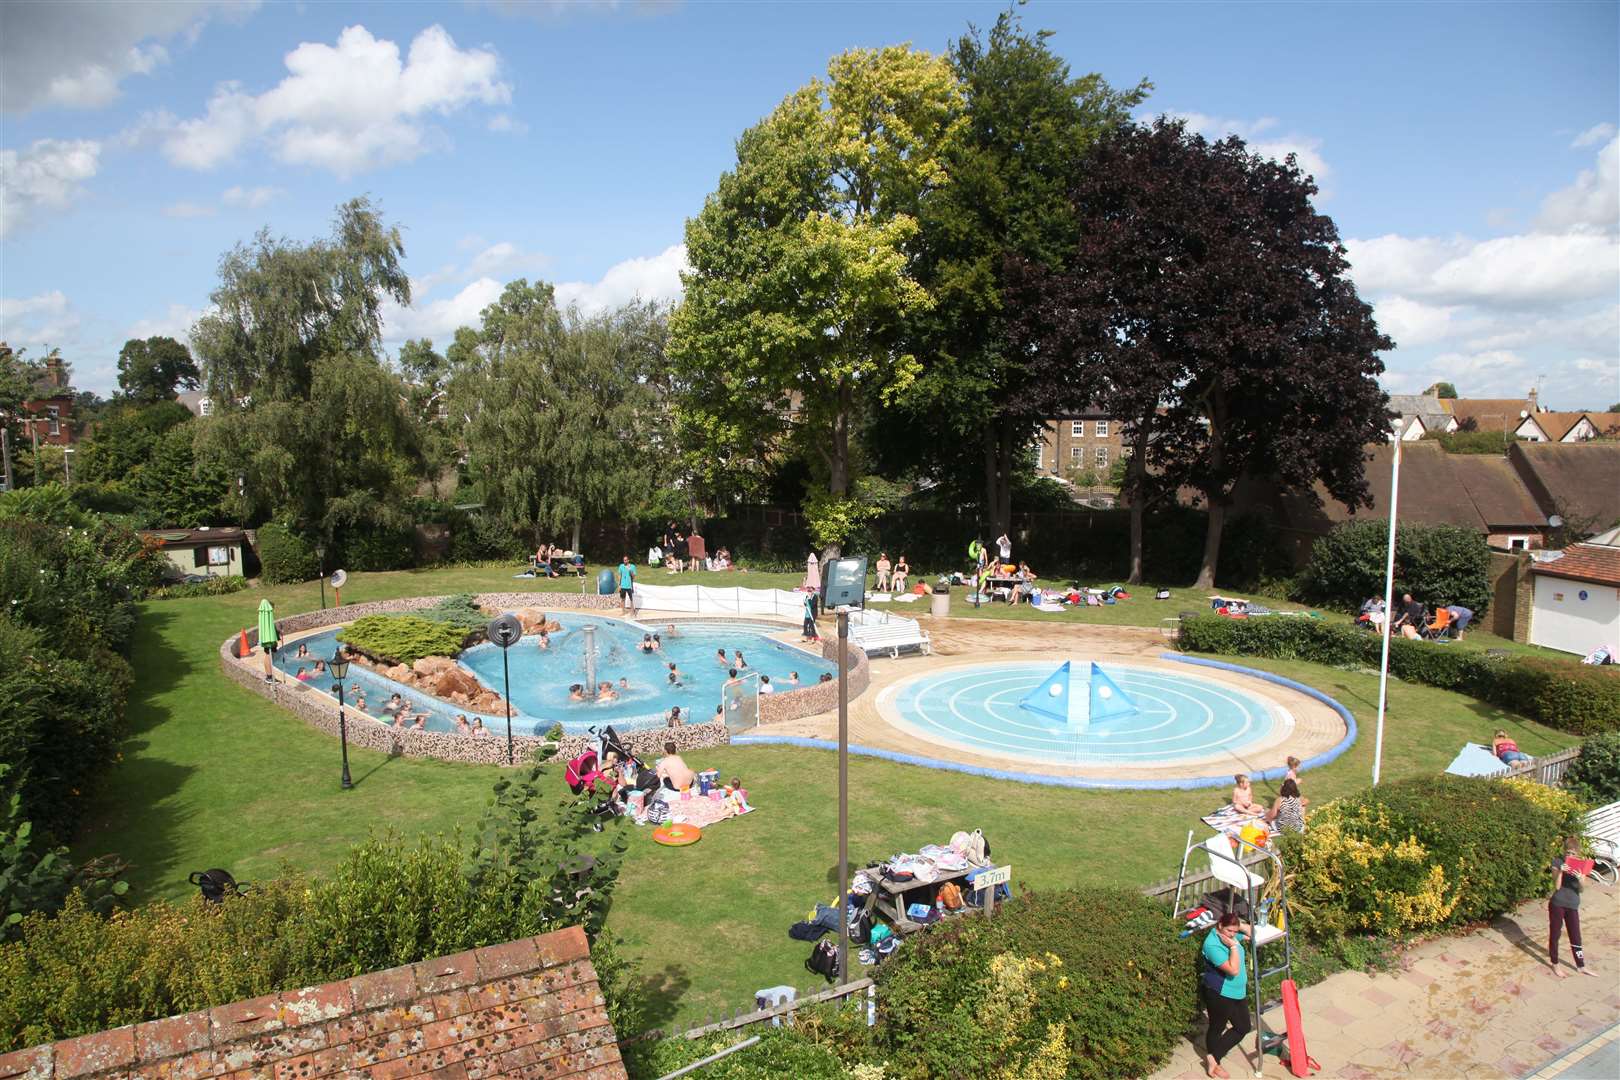 Faversham's toddler outdoor pool and rapids